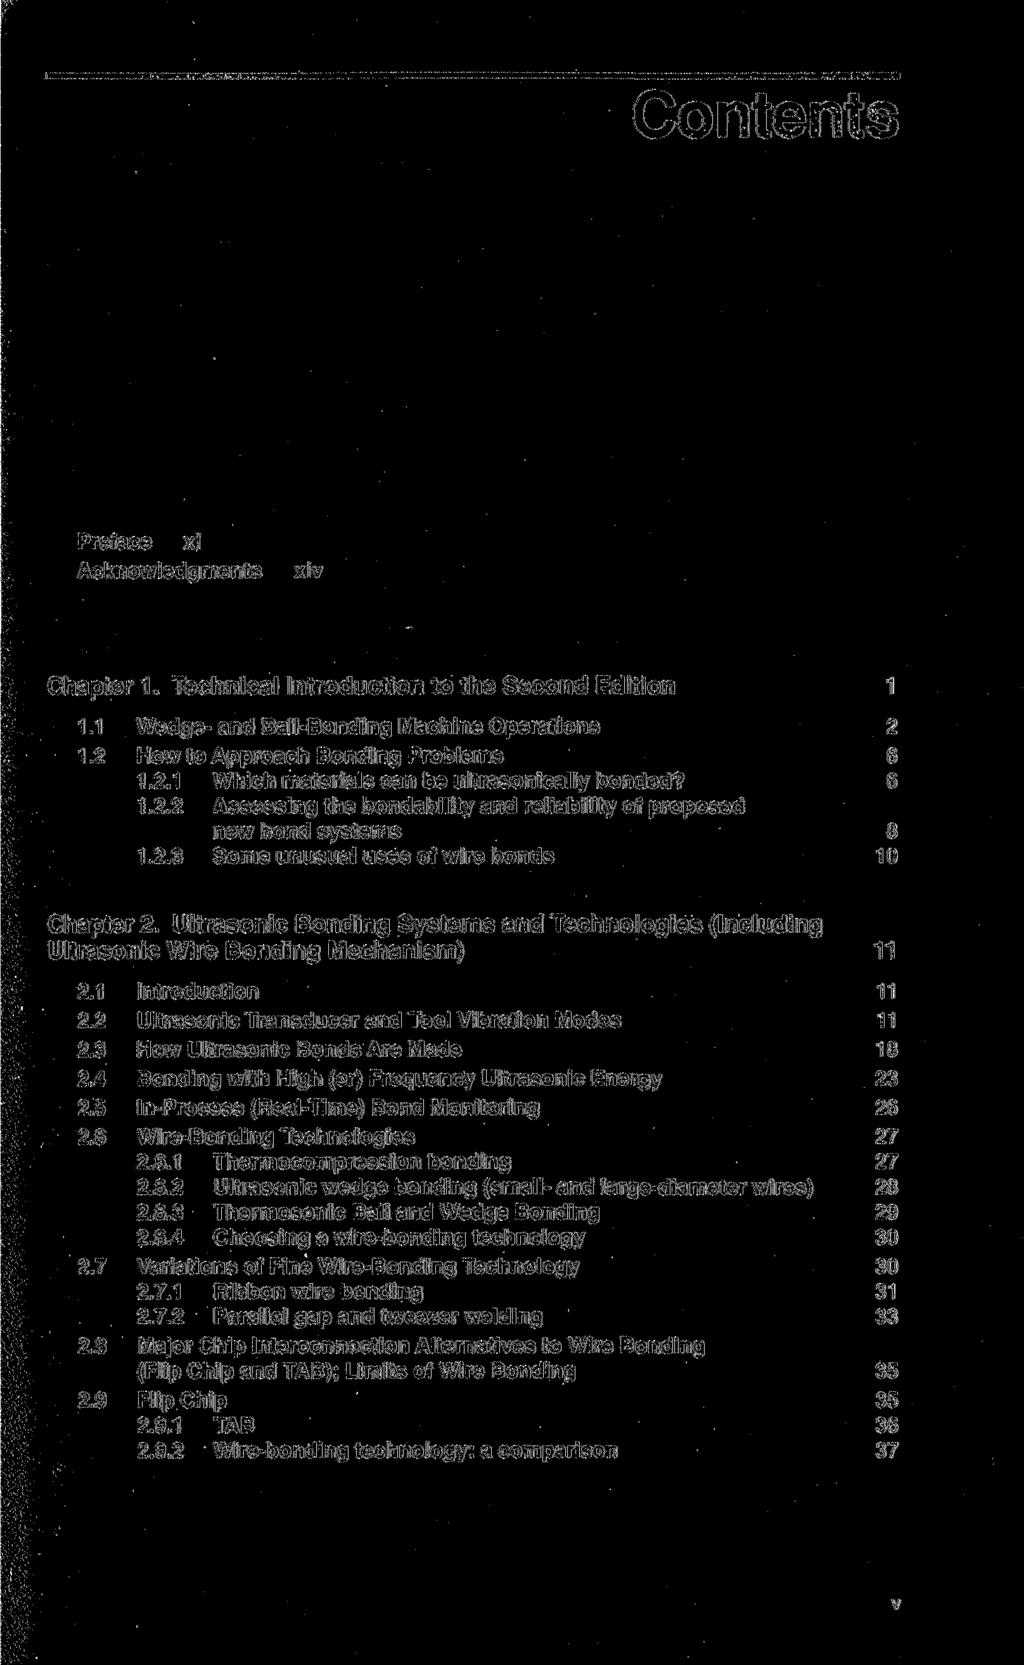 Contents Preface xi Acknowledgments xiv Chapter 1. Technical Introduction to the Second Edition 1 1.1 Wedge- and Ball-Bonding Machine Operations 2 1.2 How to Approach Bonding Problems 6 1.2.1 Which materials can be ultrasonically bonded?